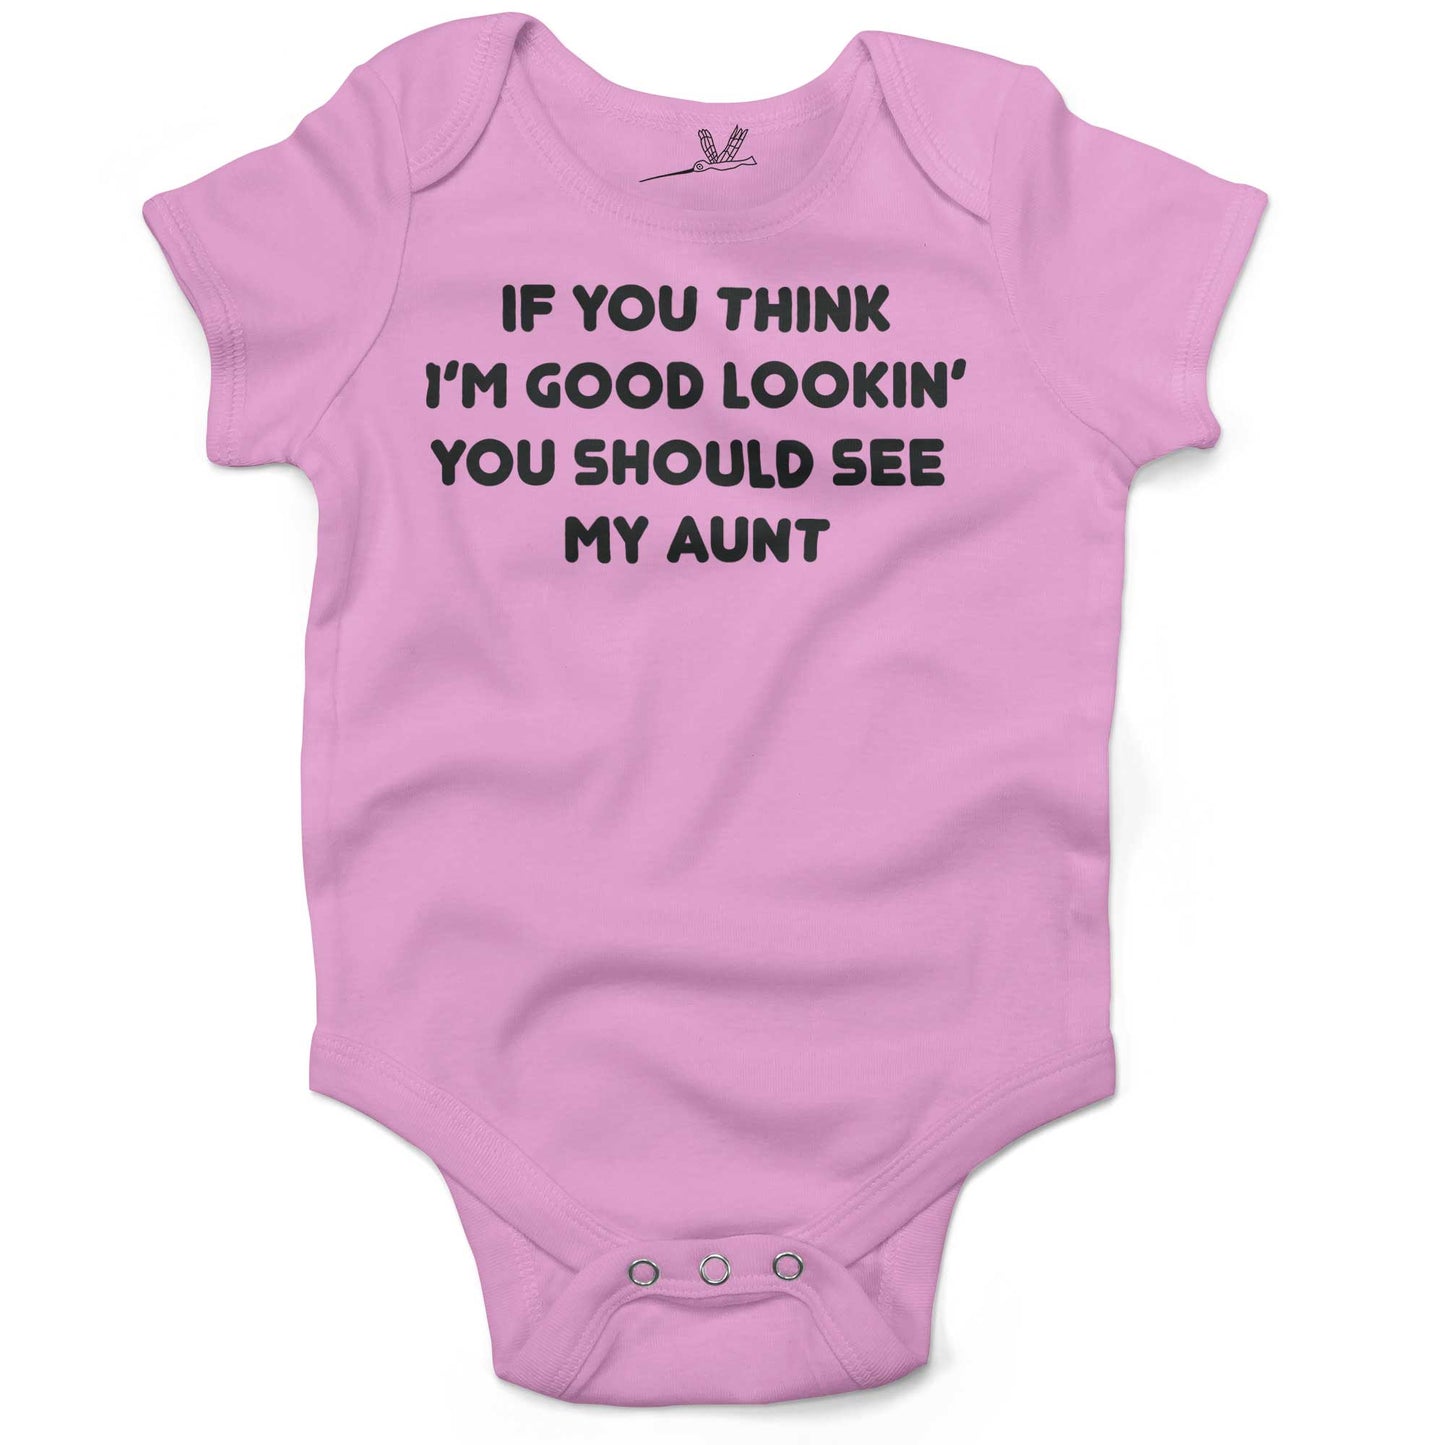 If You Think I'm Good Lookin' You Should See My Aunt Infant Bodysuit or Raglan Tee-Organic Pink-3-6 months